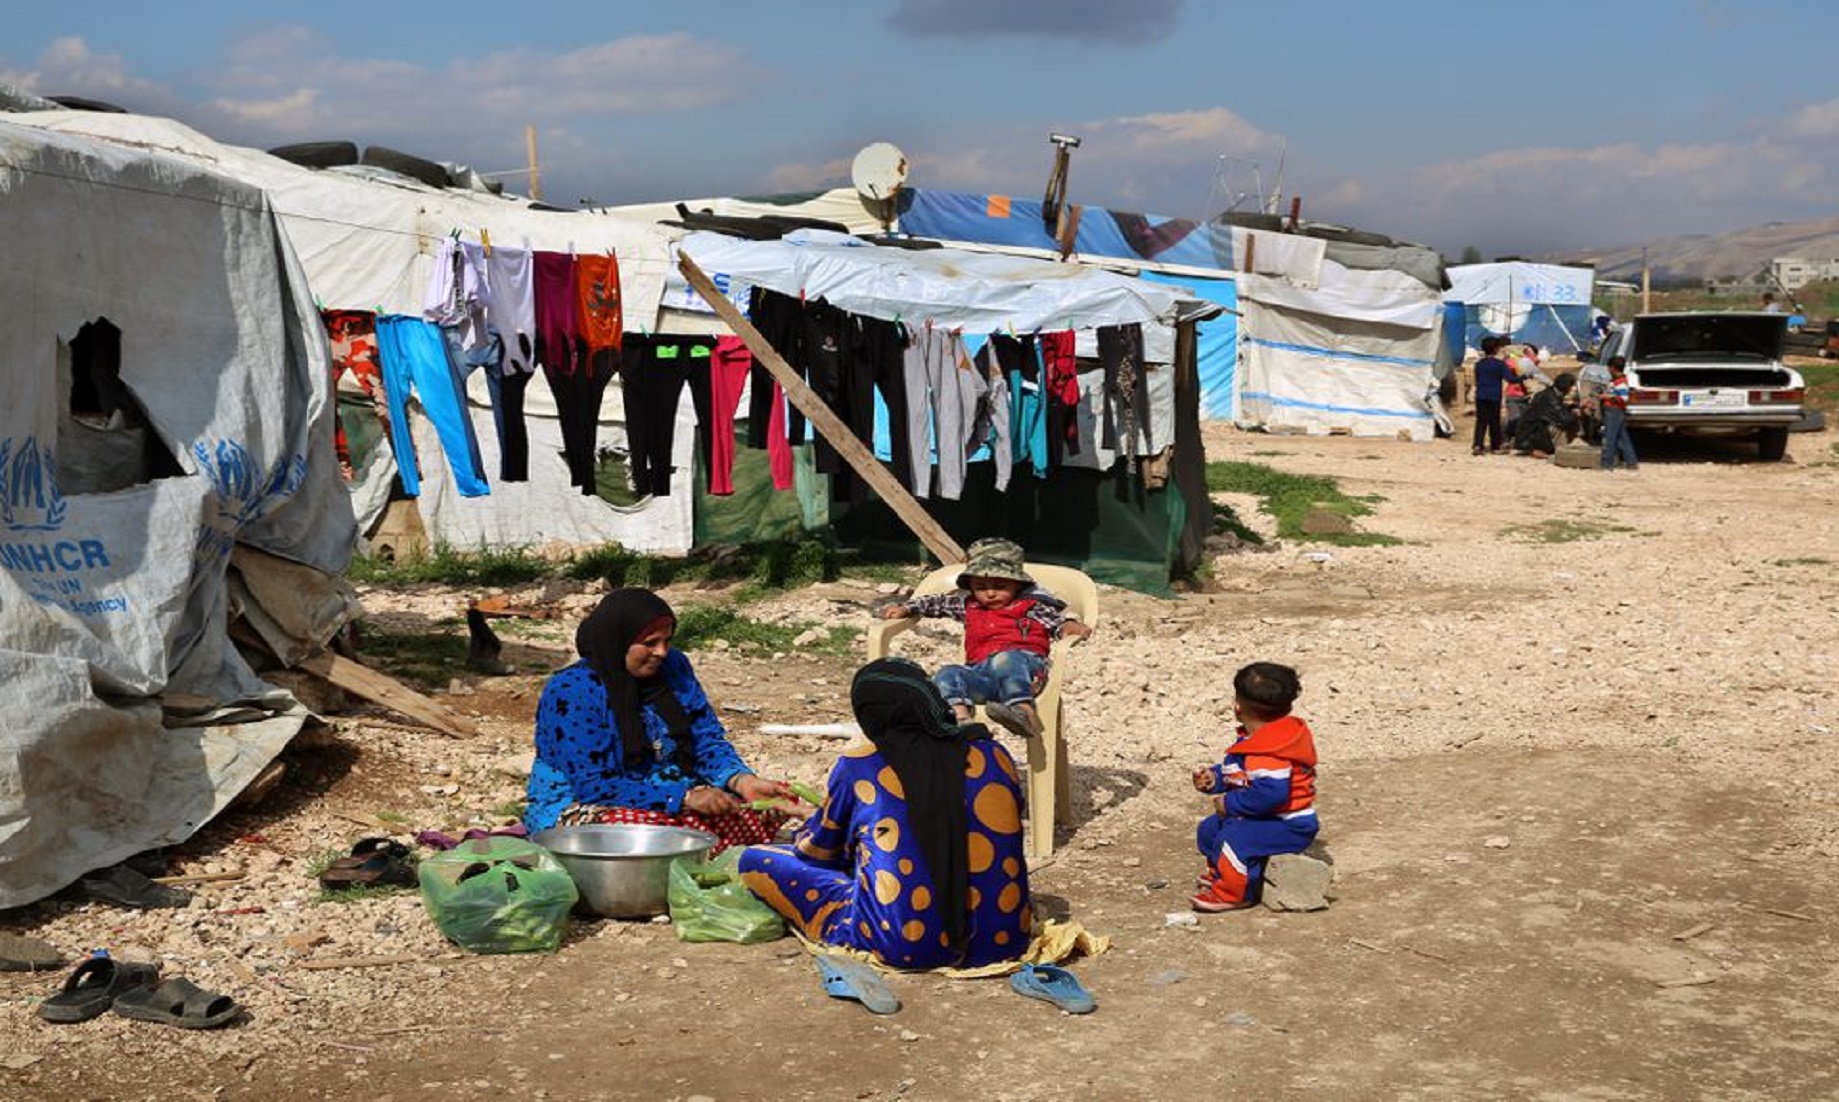 Turkey Plans To Send One Million Syrians Home, Answering Public Unease